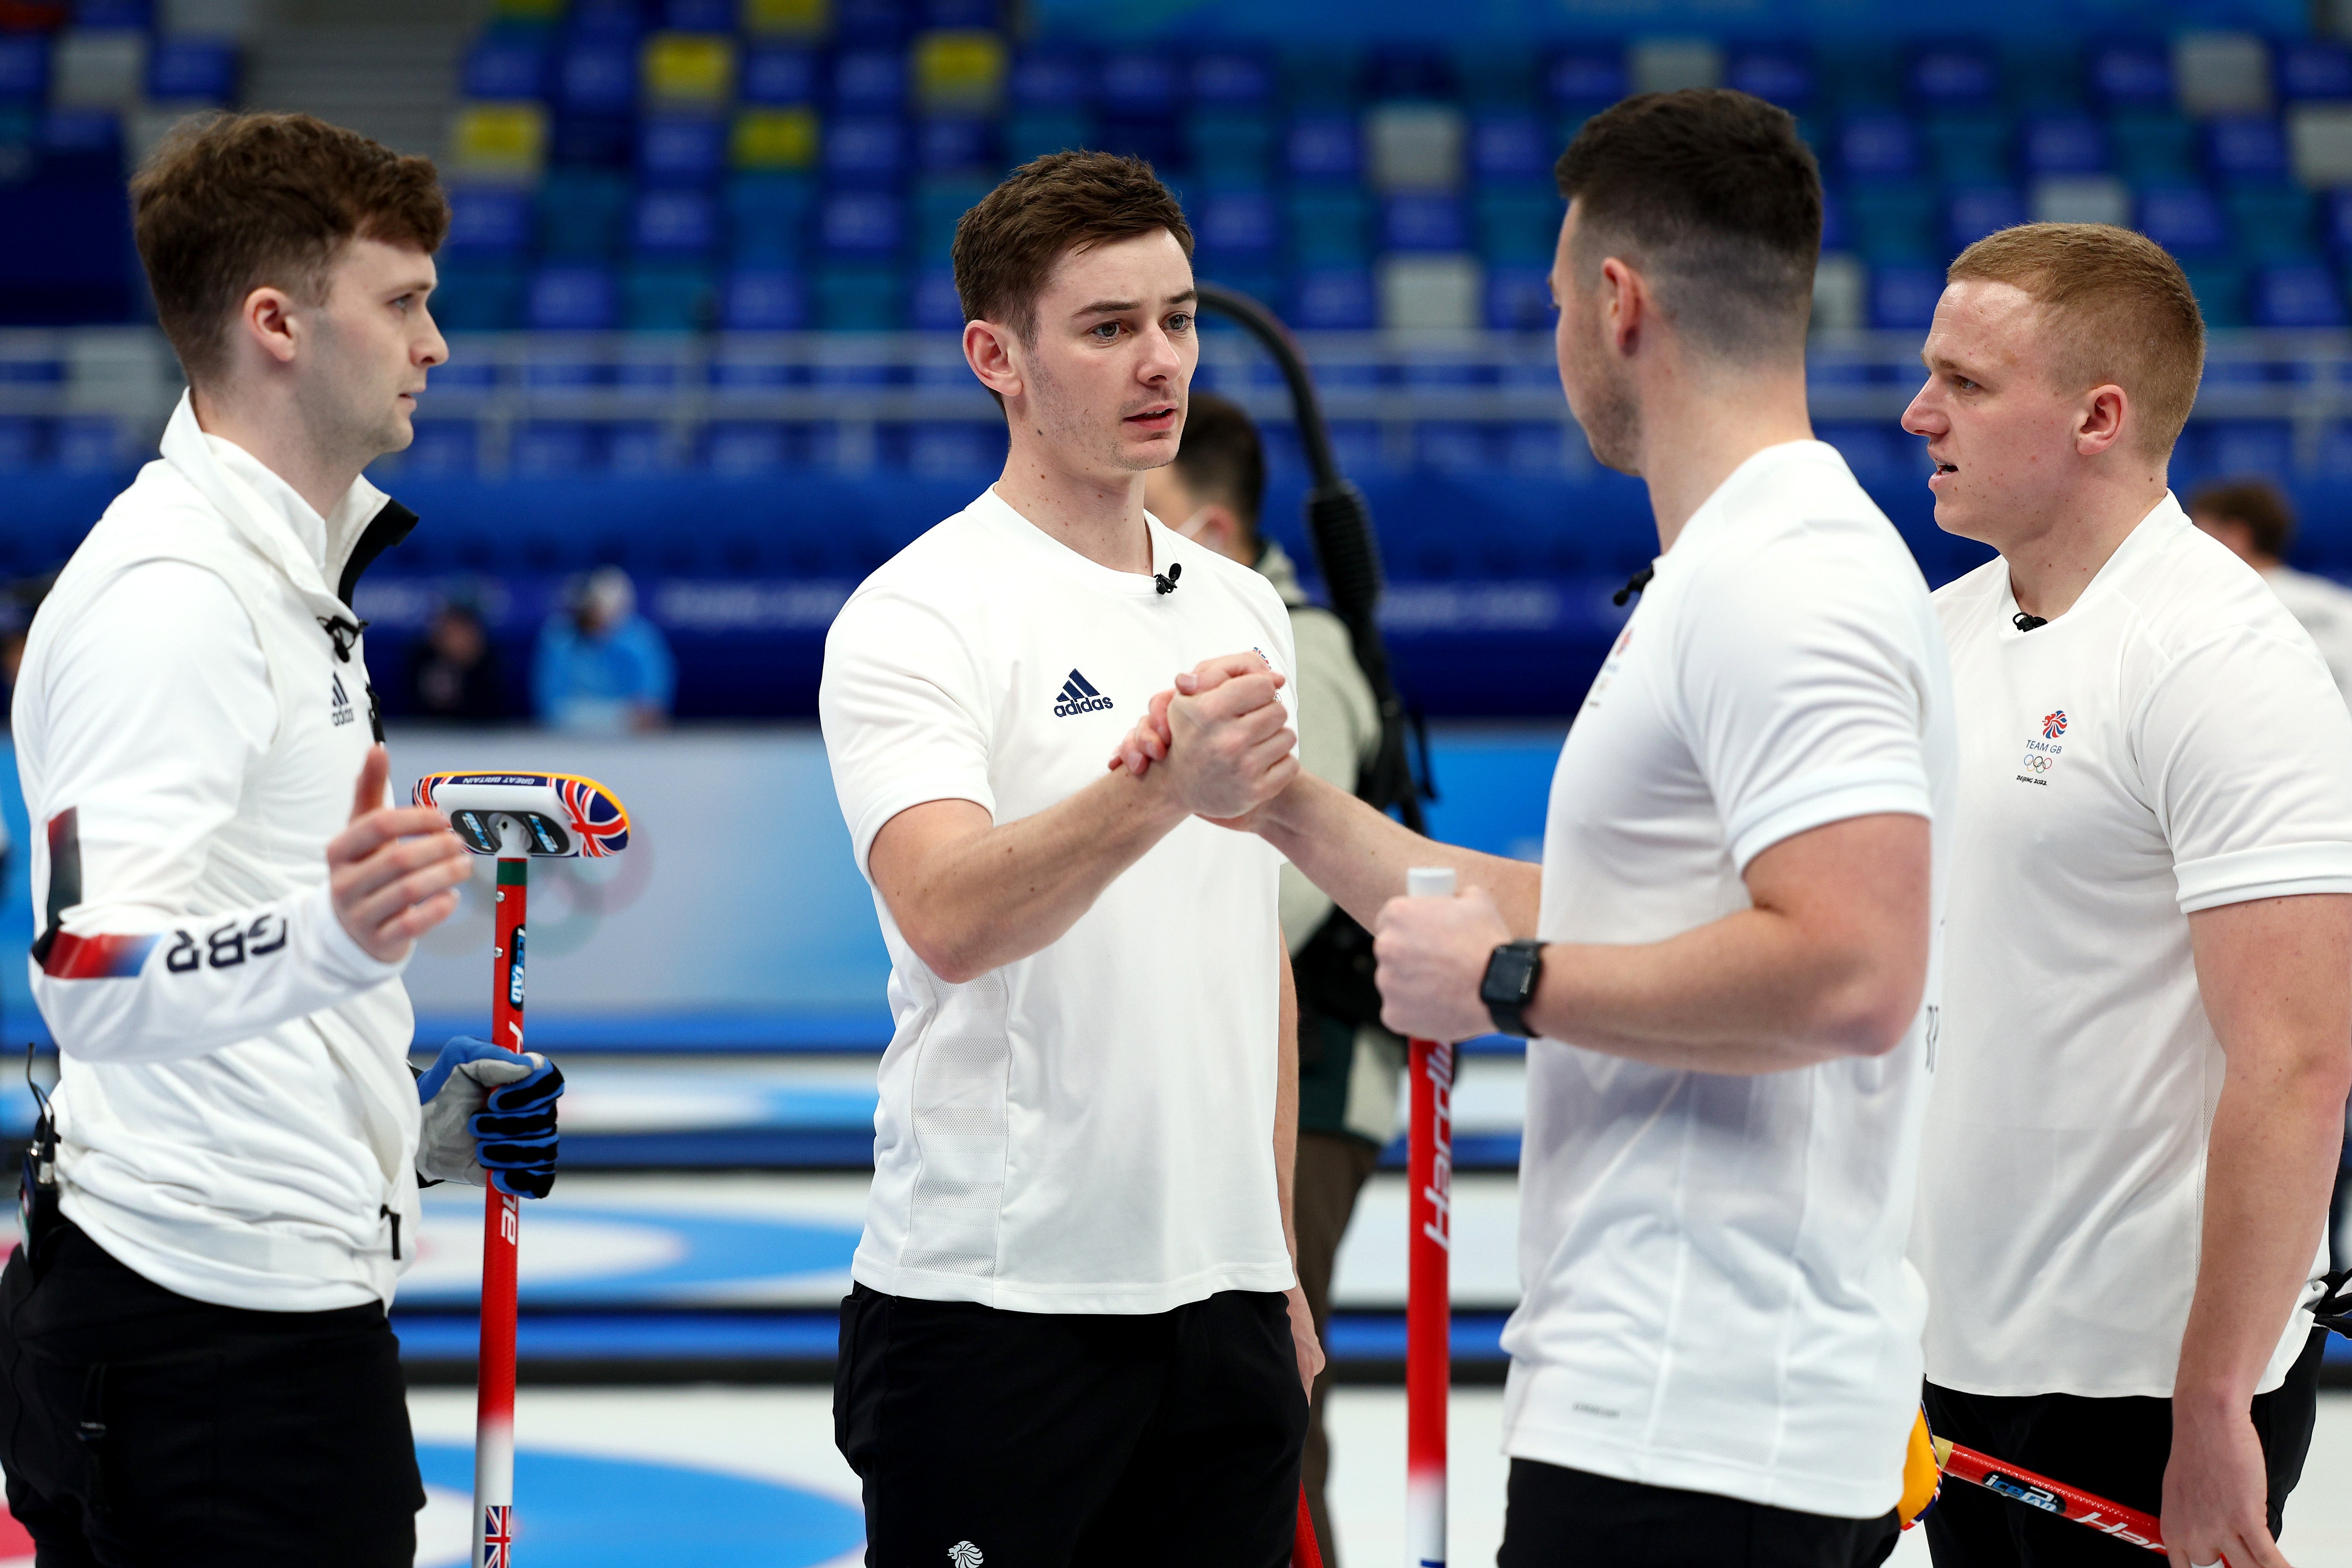 Team GB’s men face Sweden, Canada and the ROC in their final three fixtures